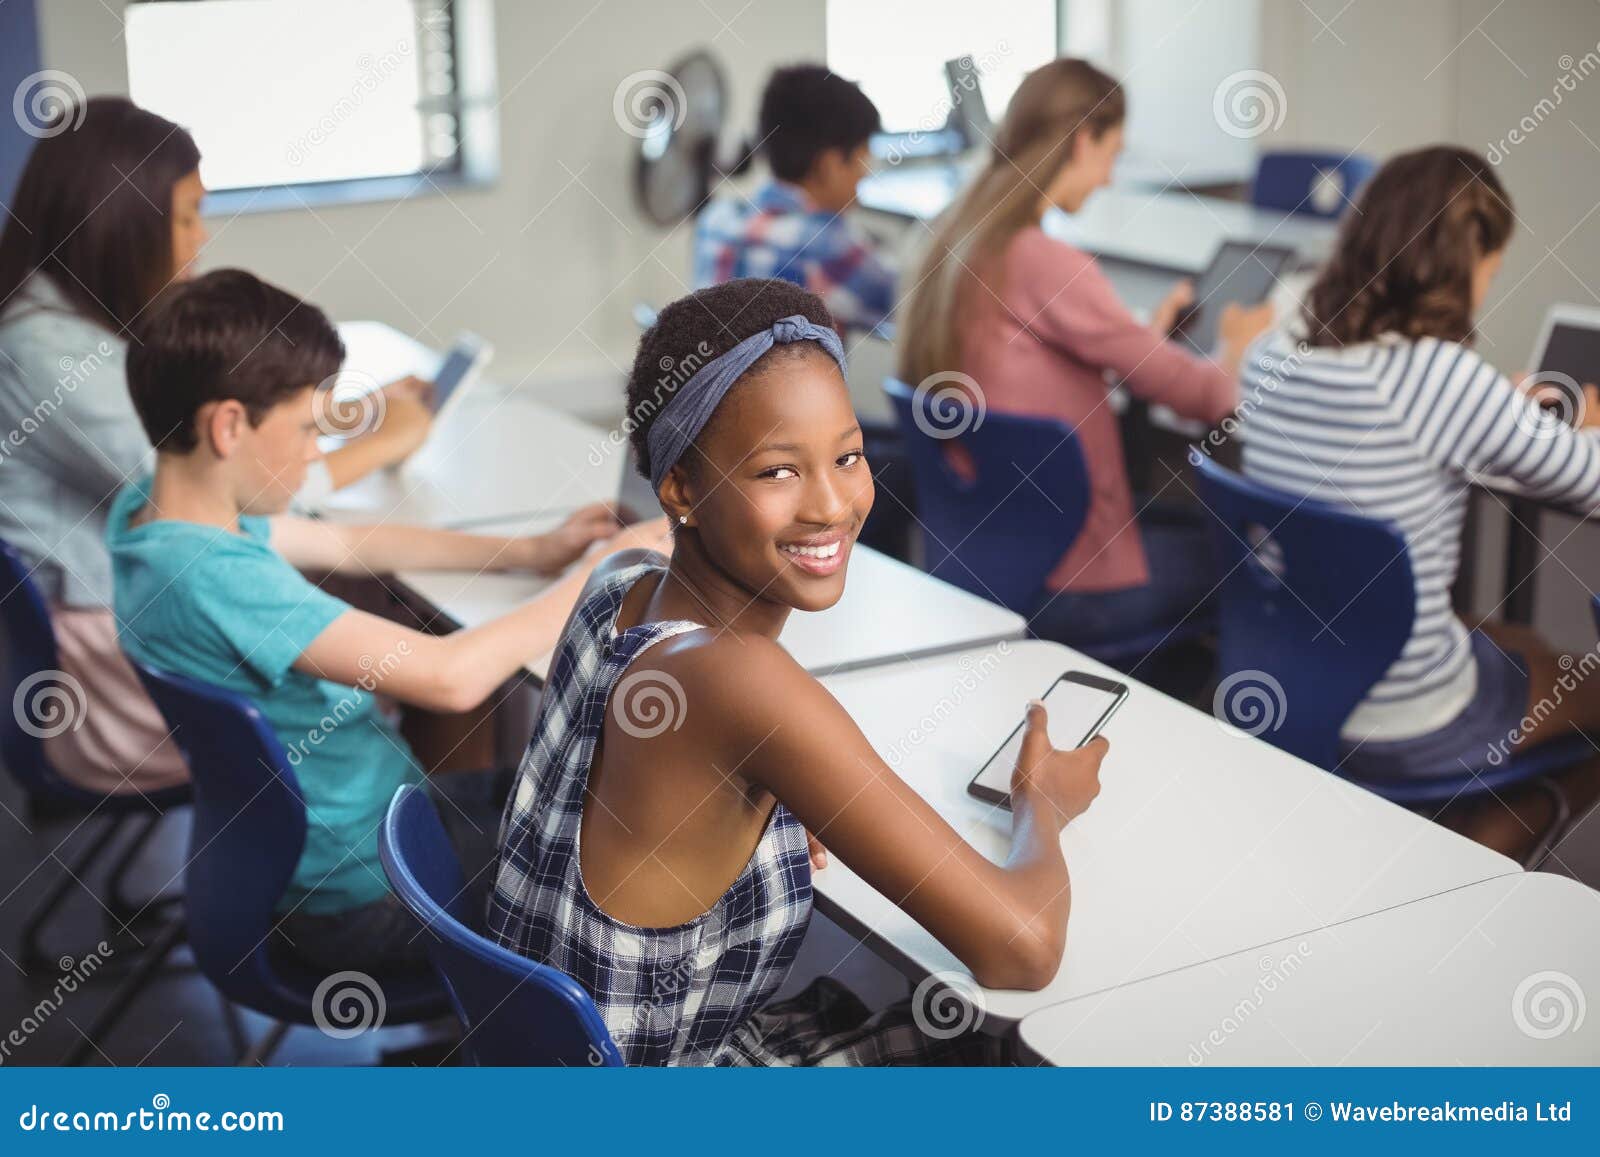 We can in class. School students Phone. Обучение на смартфоне. Teacher рук students shoot on your telephone. Students use their mobile Phones in class it s the Rule.